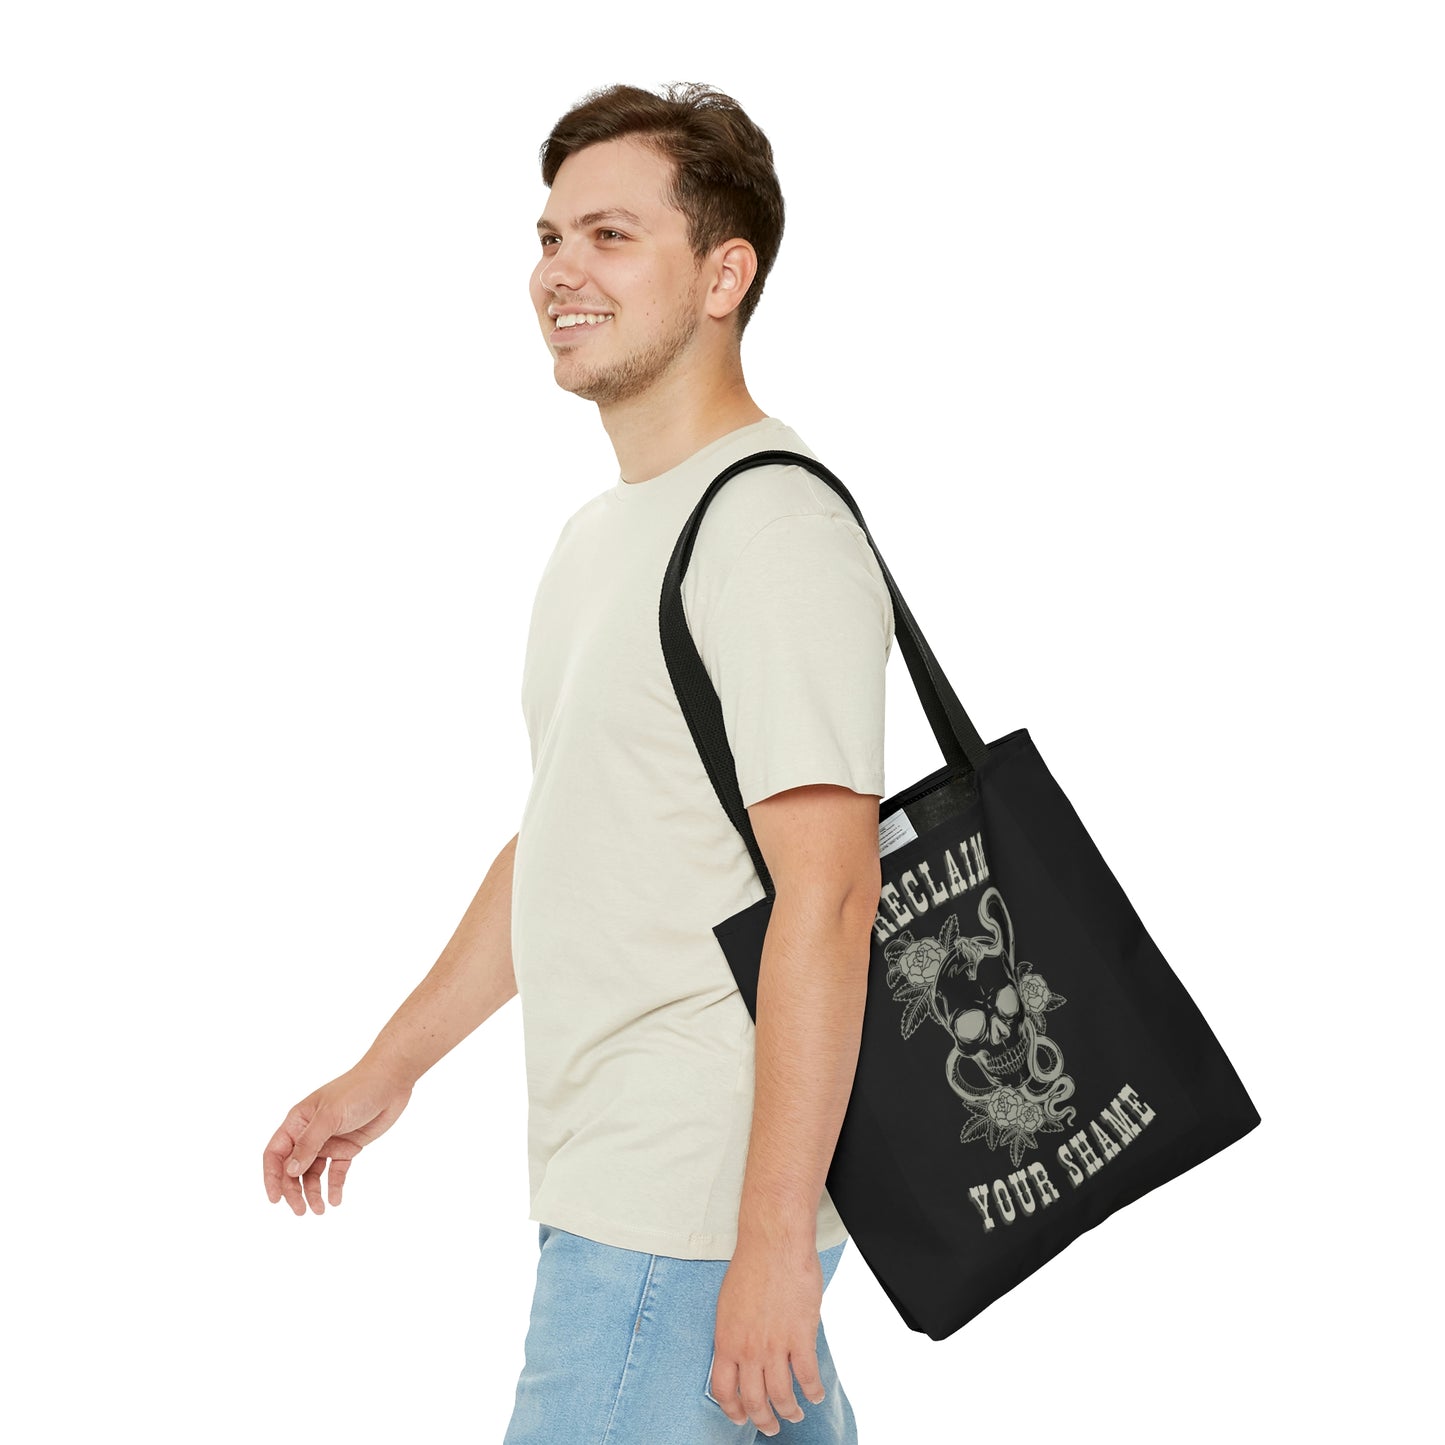 Reclaim Your Shame [Gauth Line] Tote Bag in 3 sizes